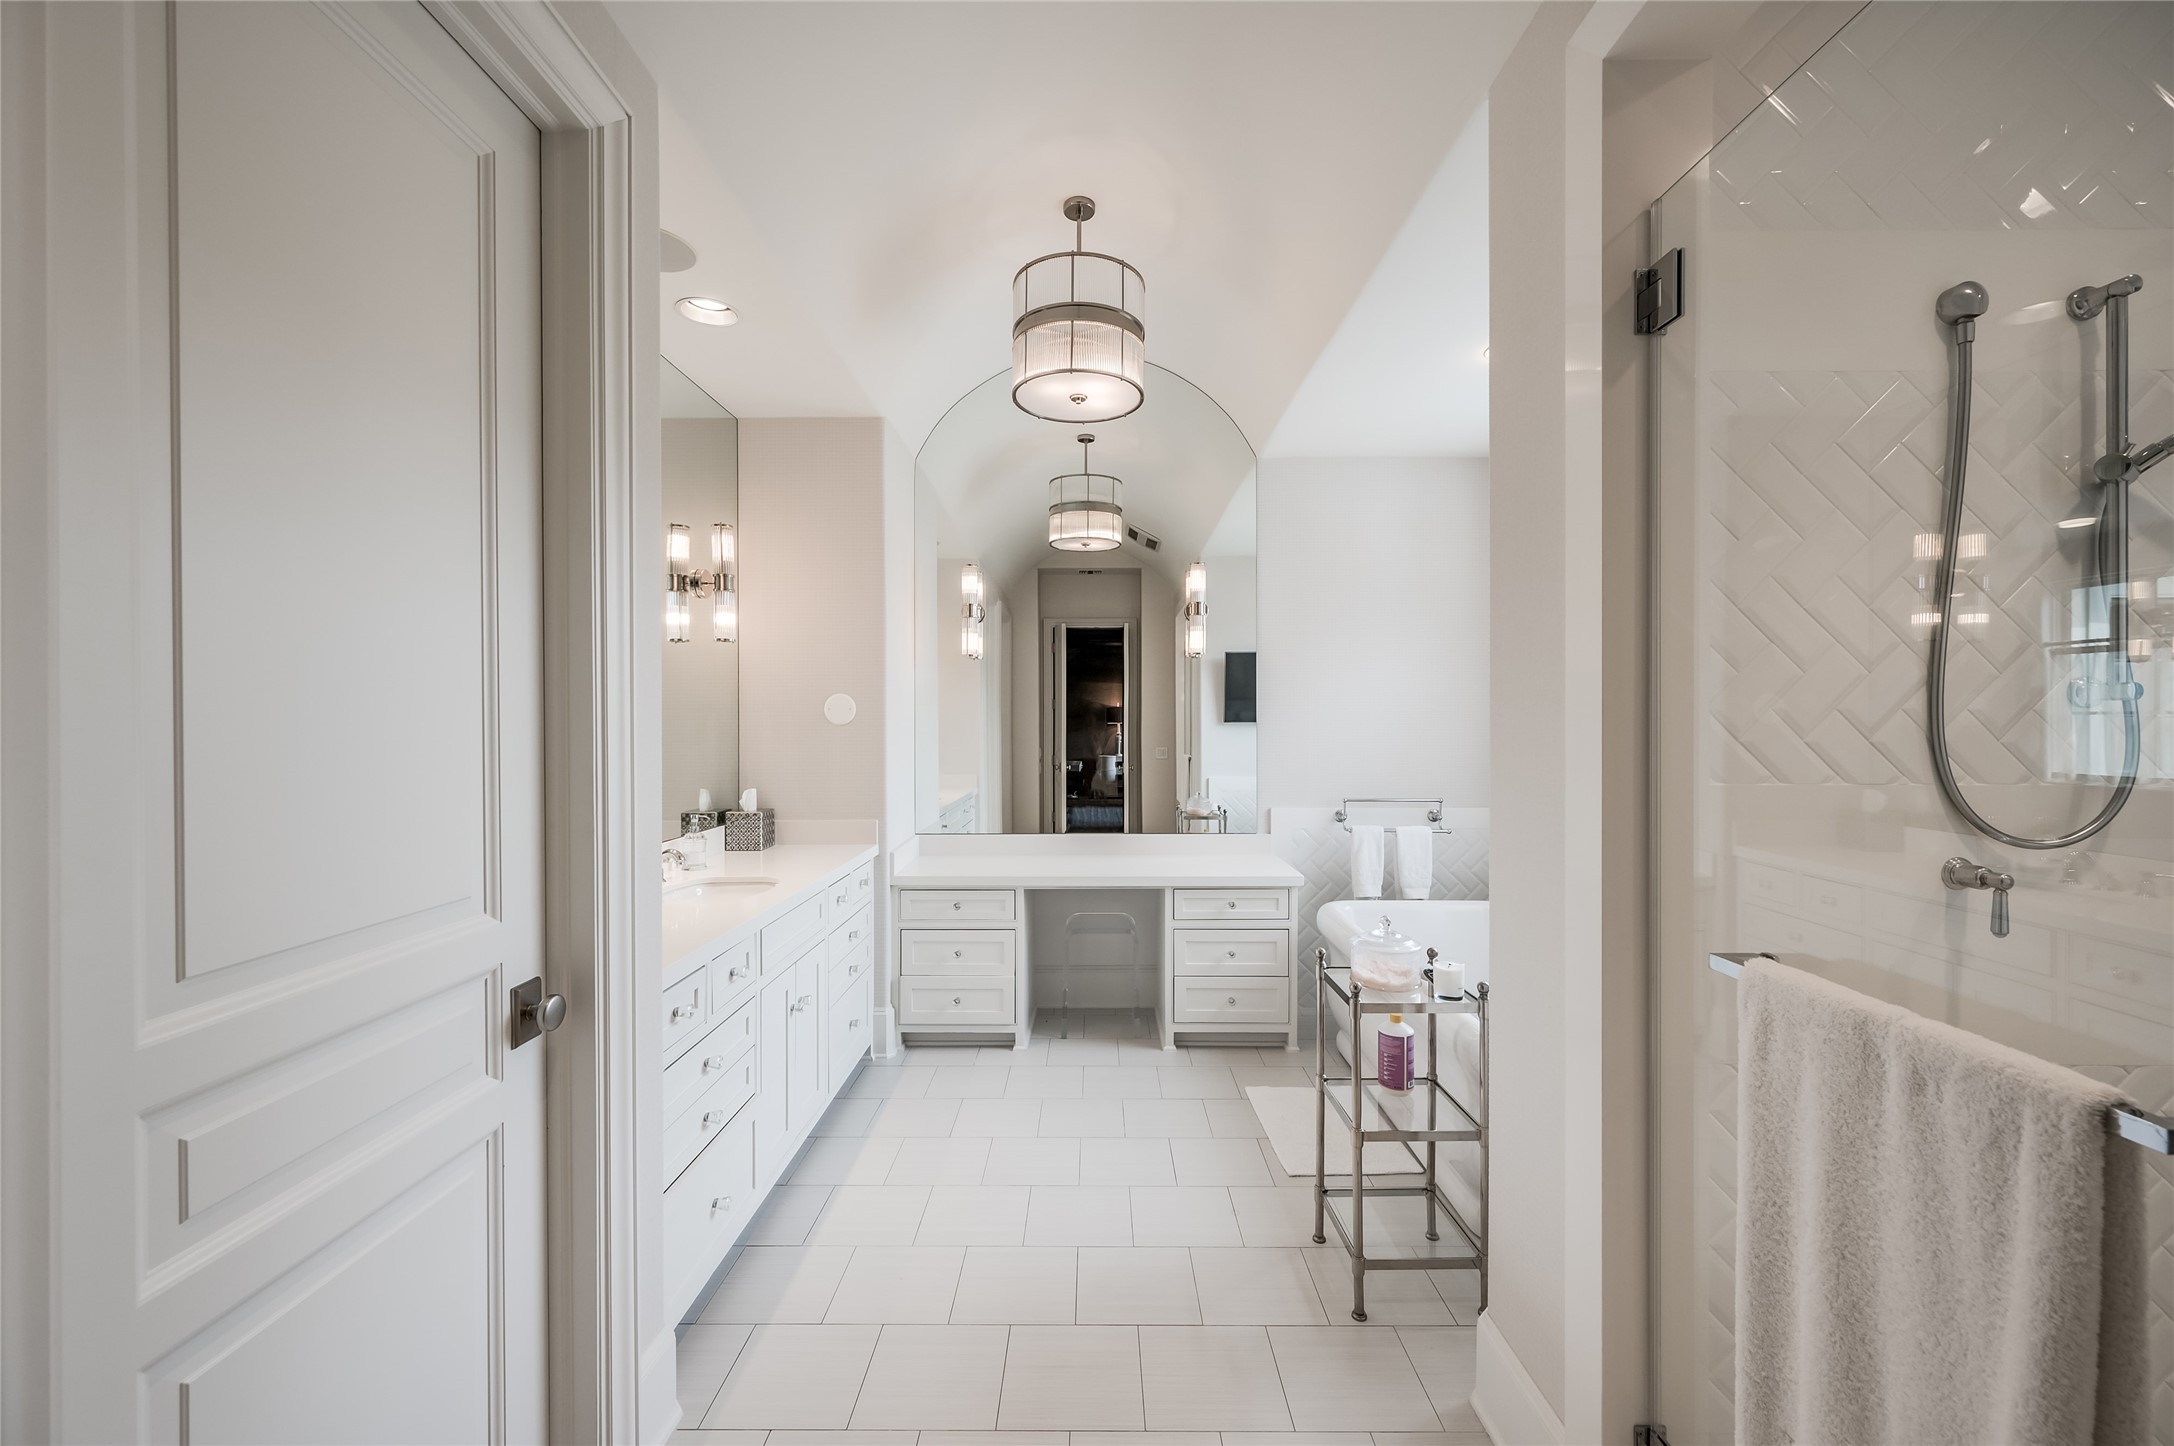 [Primary Bath]
The dual primary bath offers privacy, two water closets, a double-entry seamless-glass shower, soaking tub, marble sink decks and floor, and two bespoke walk-in closets. Note barrel ceiling.